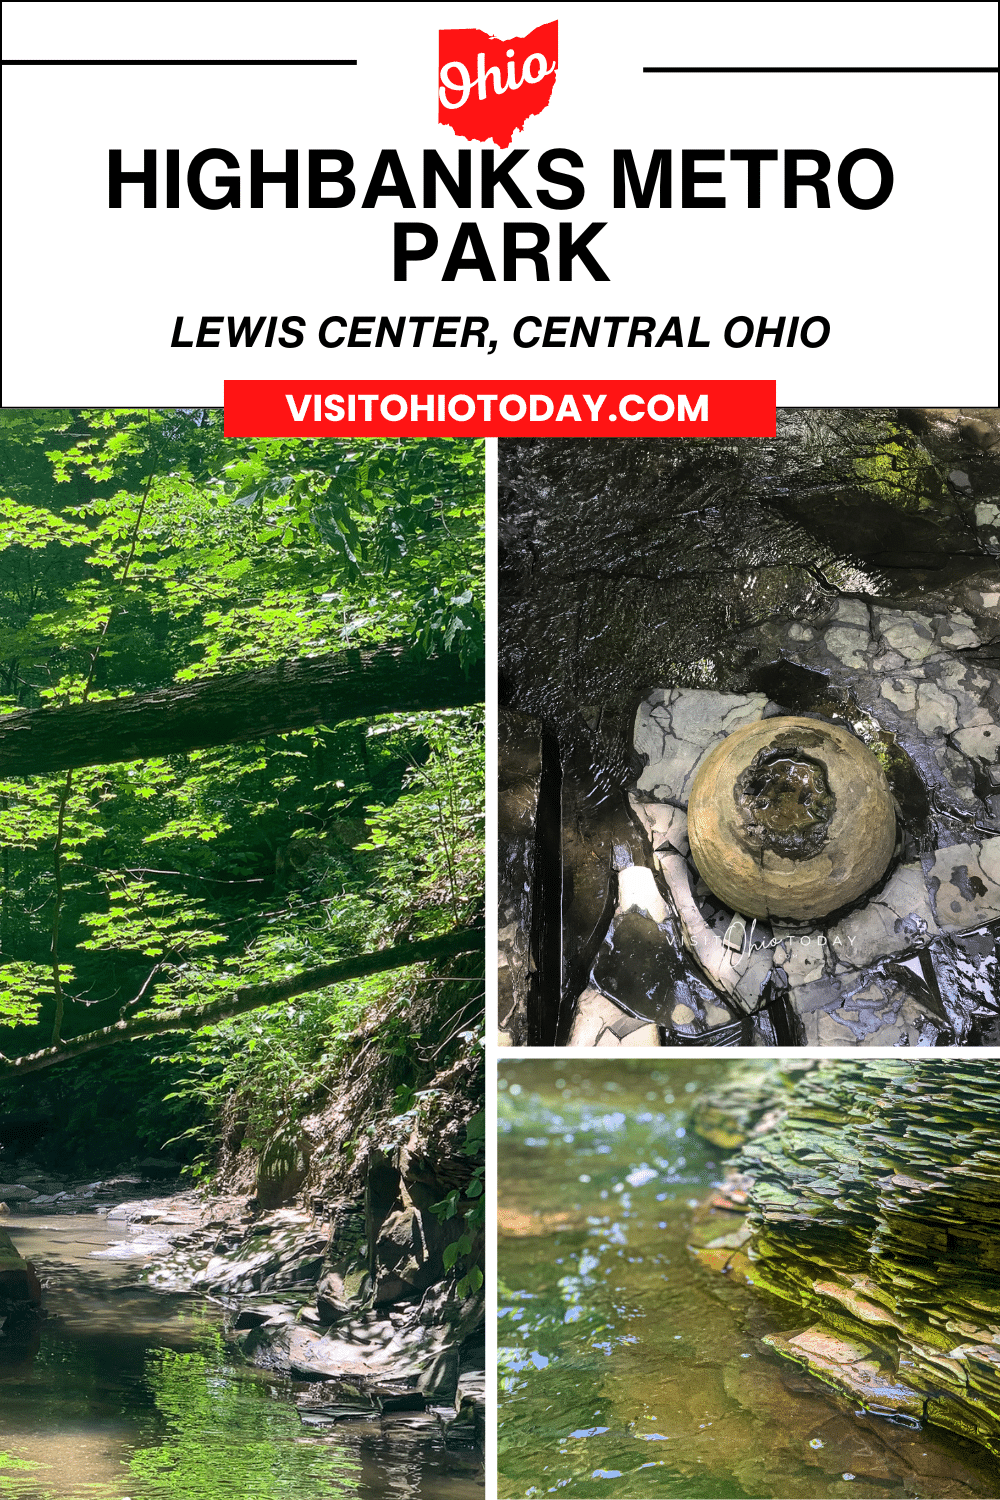 Highbanks Metro Park in central Ohio has unique natural features and an extensive and diverse network of trails that take you through these features. The park covers an area of 1,200 acres.